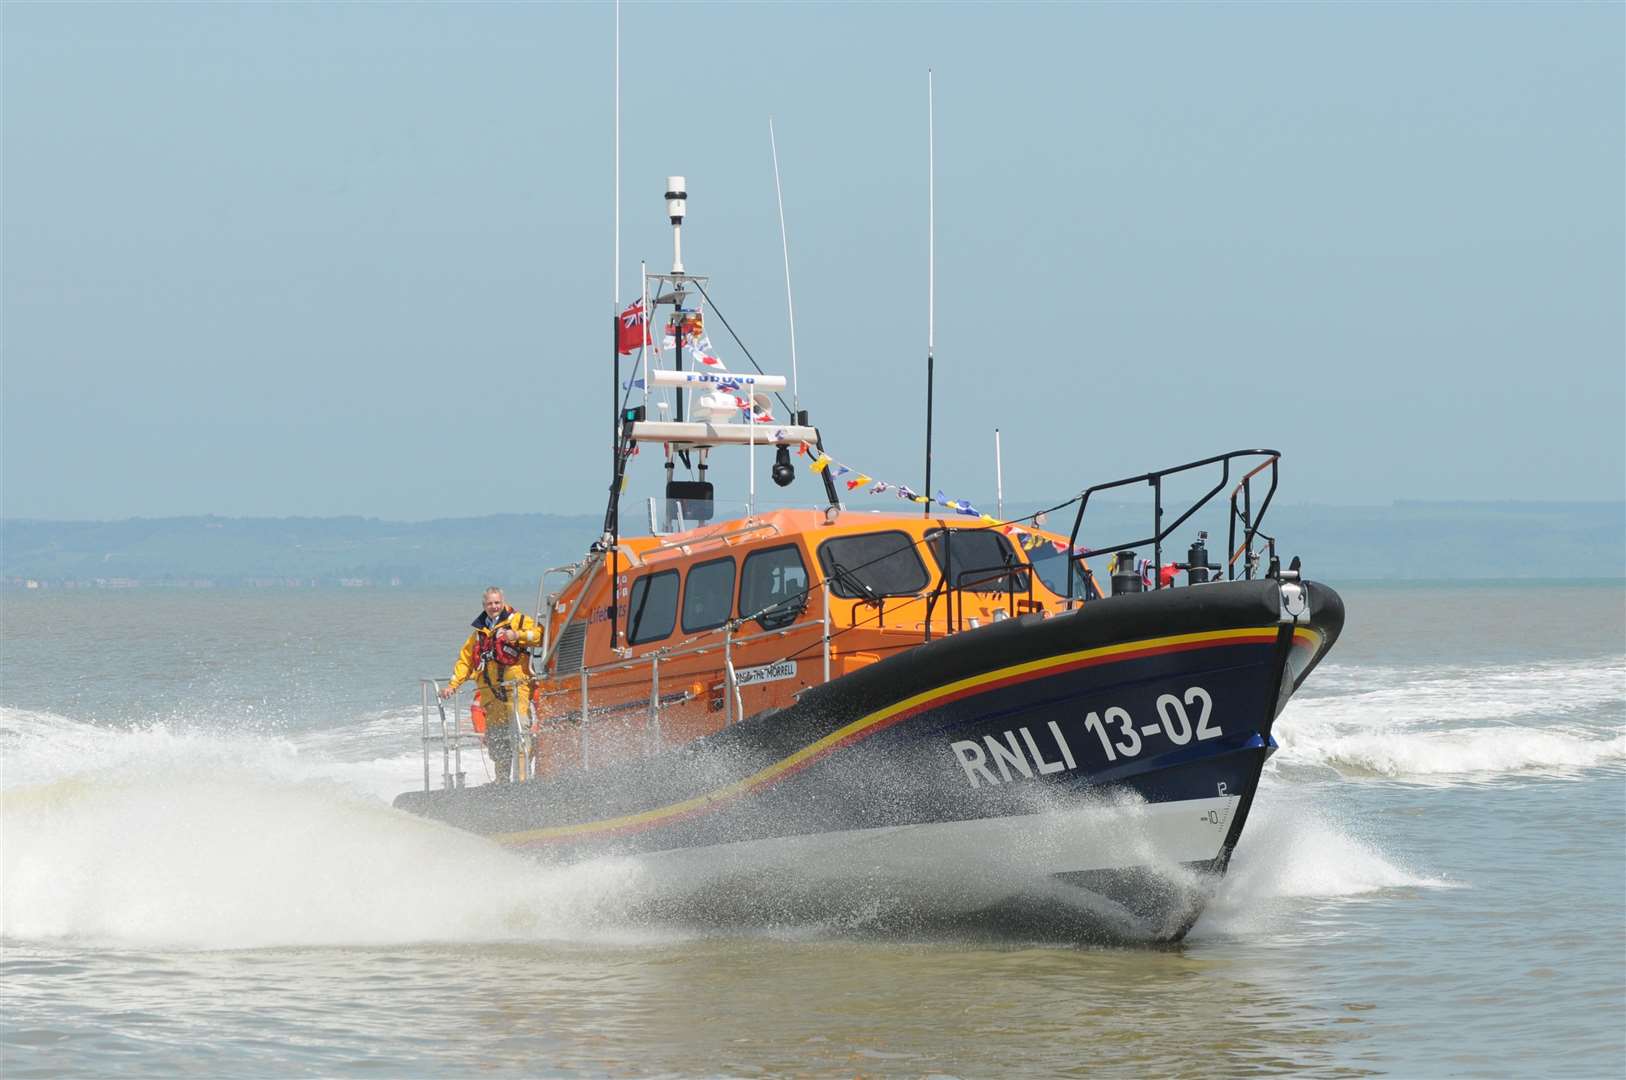 Dungeness RNLI rescue boat was launched